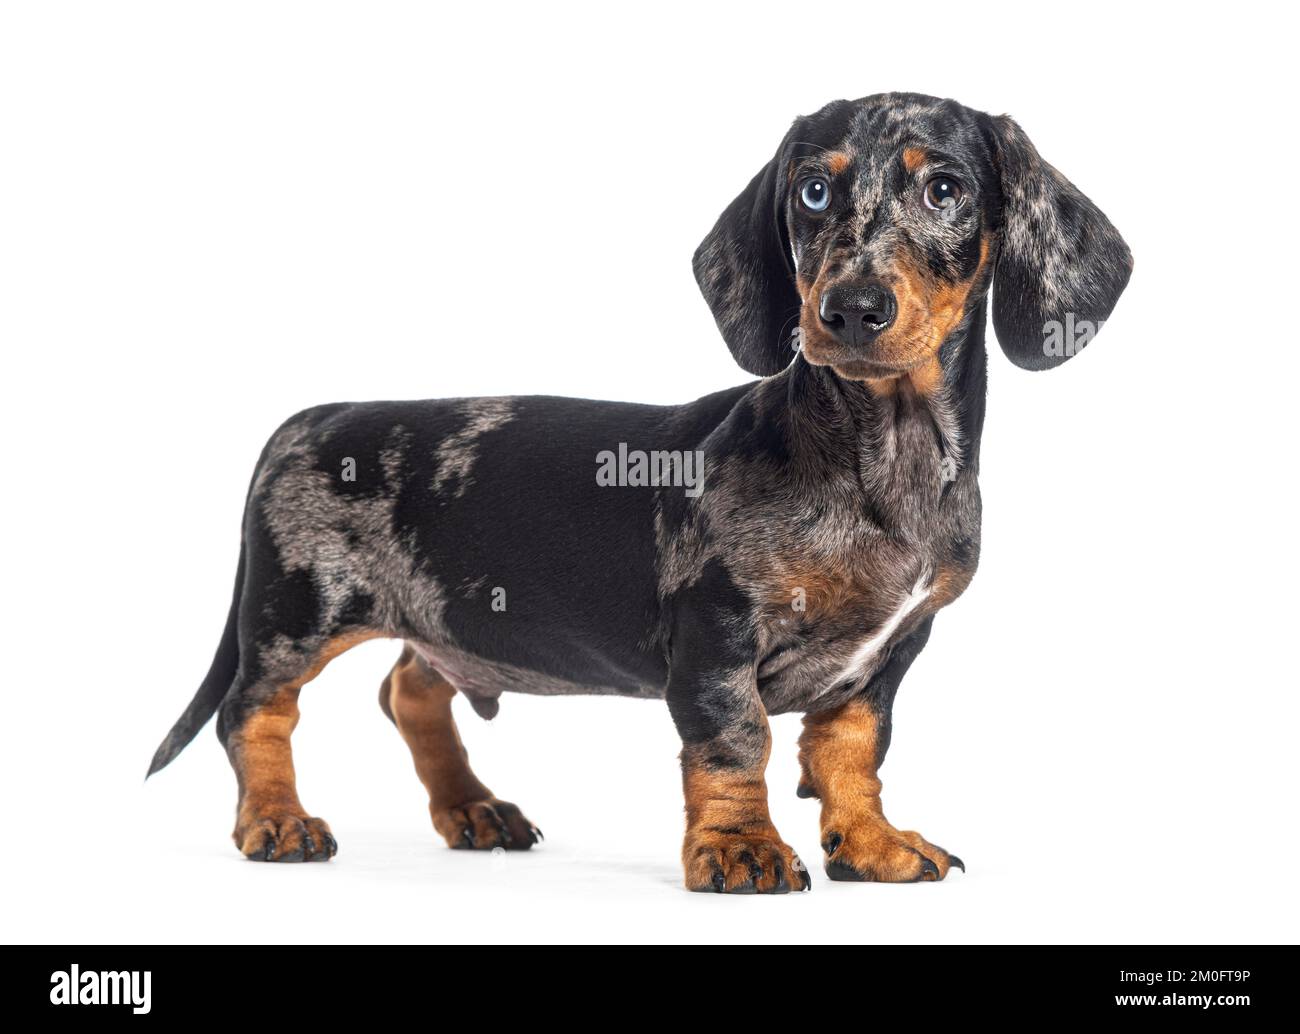 Standing, side view of a Puppy Merle dapple Dachshund odd-eyed, isolated on white Stock Photo